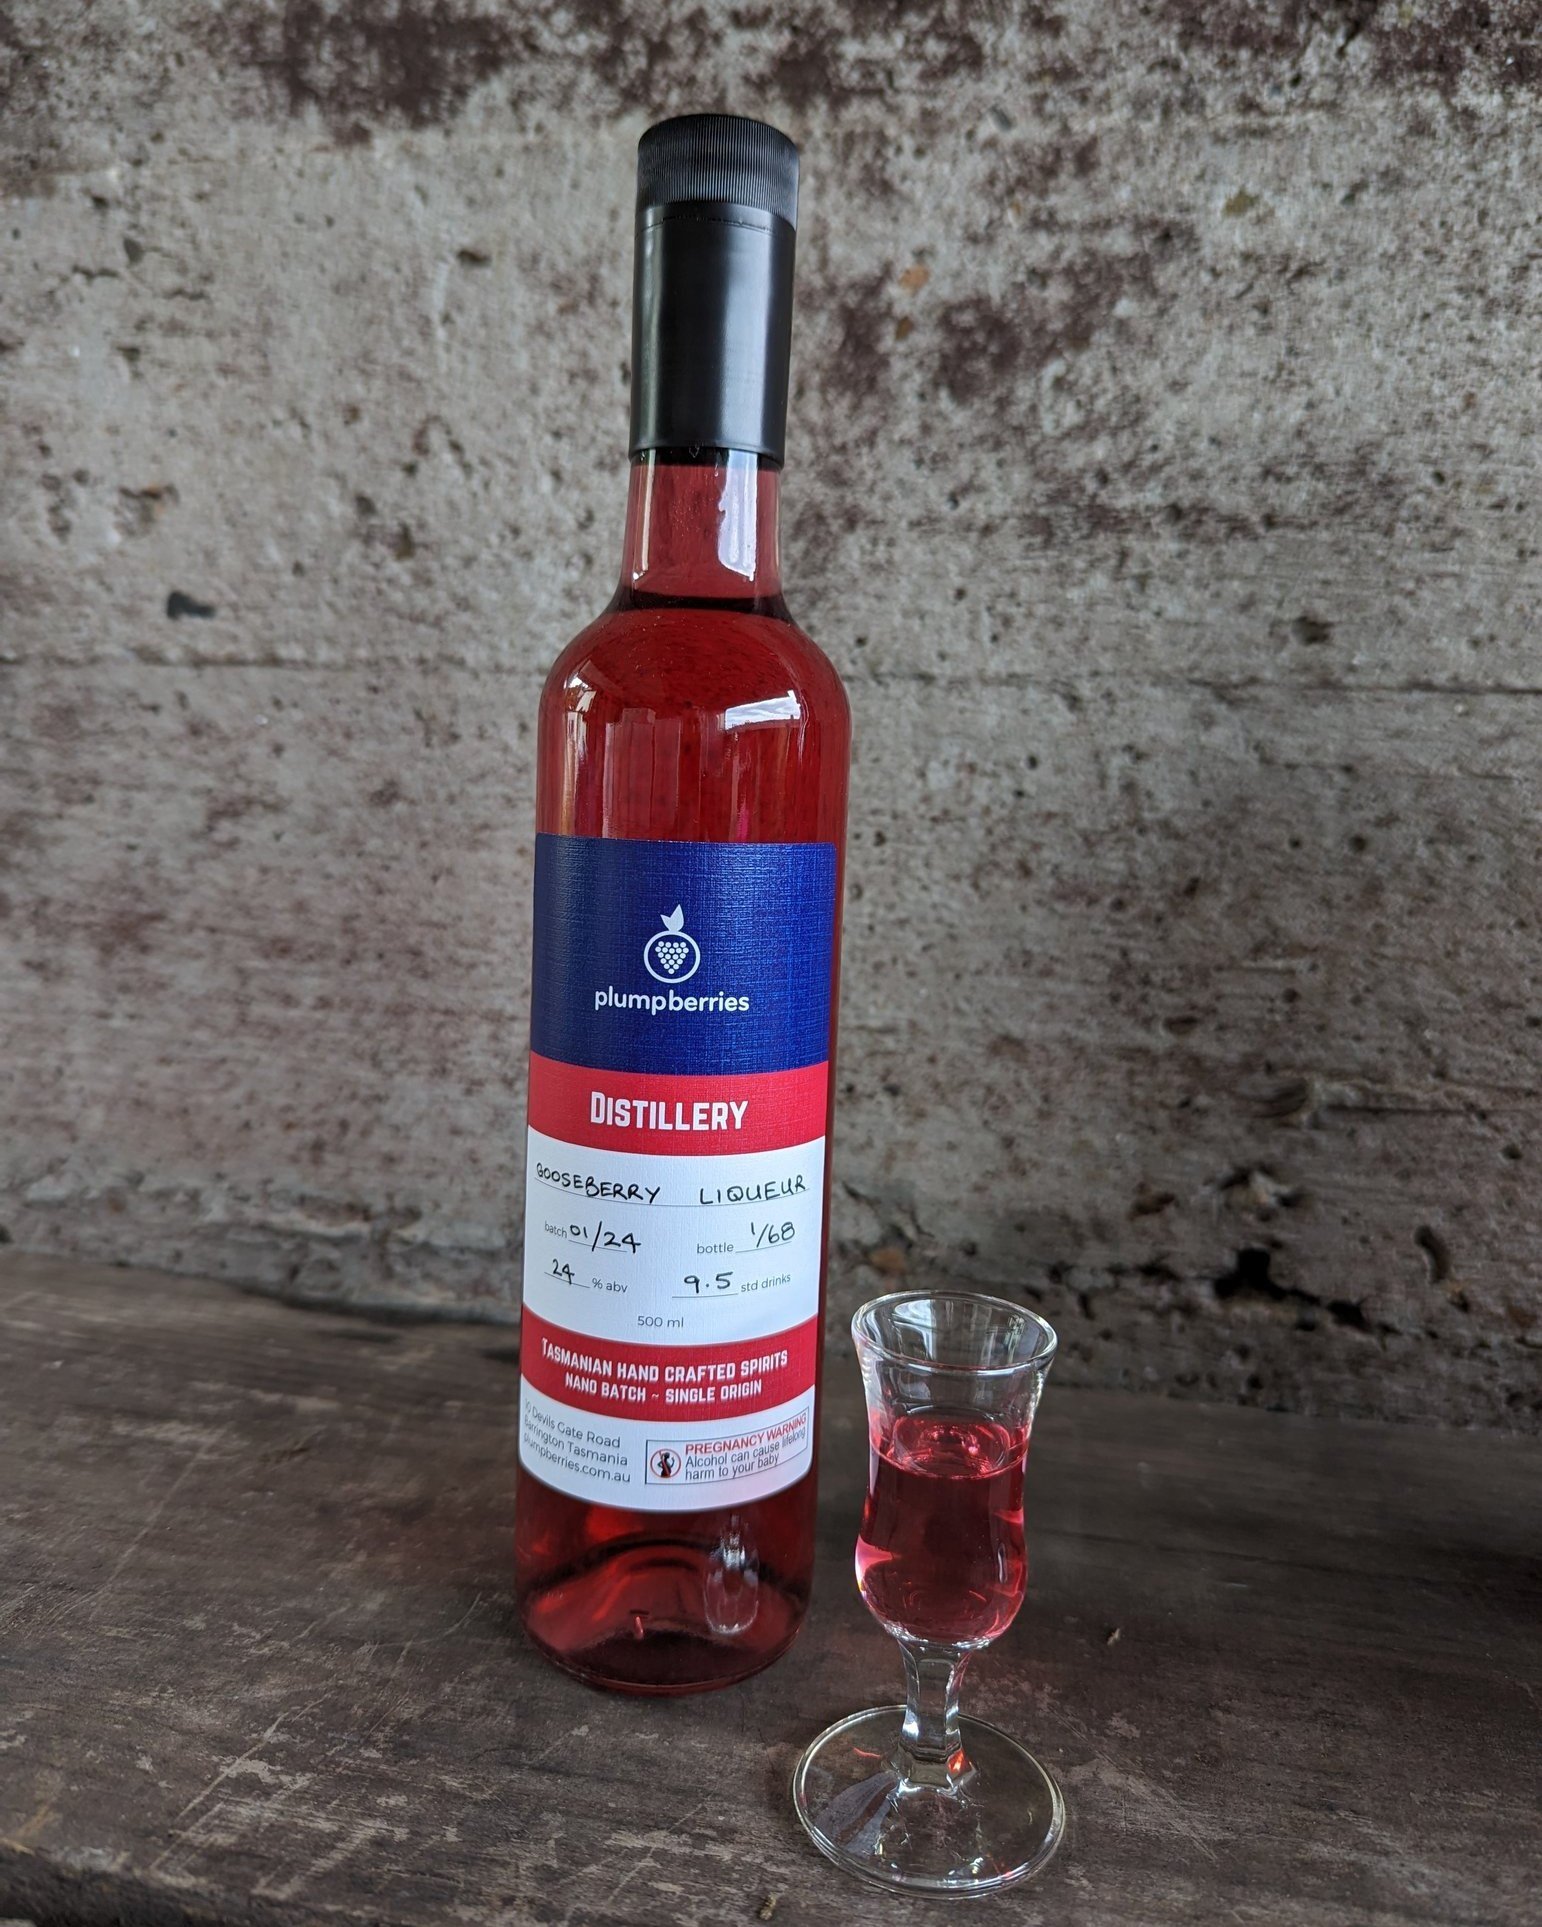 SUBSCRIBE TO OUR DISTILLERY NEWSLETTER

We're planning several very special small batch liqueurs and other distilled products this year. We picked and froze a diverse range of our fruits especially for this purpose. 

Be the first to know about our n